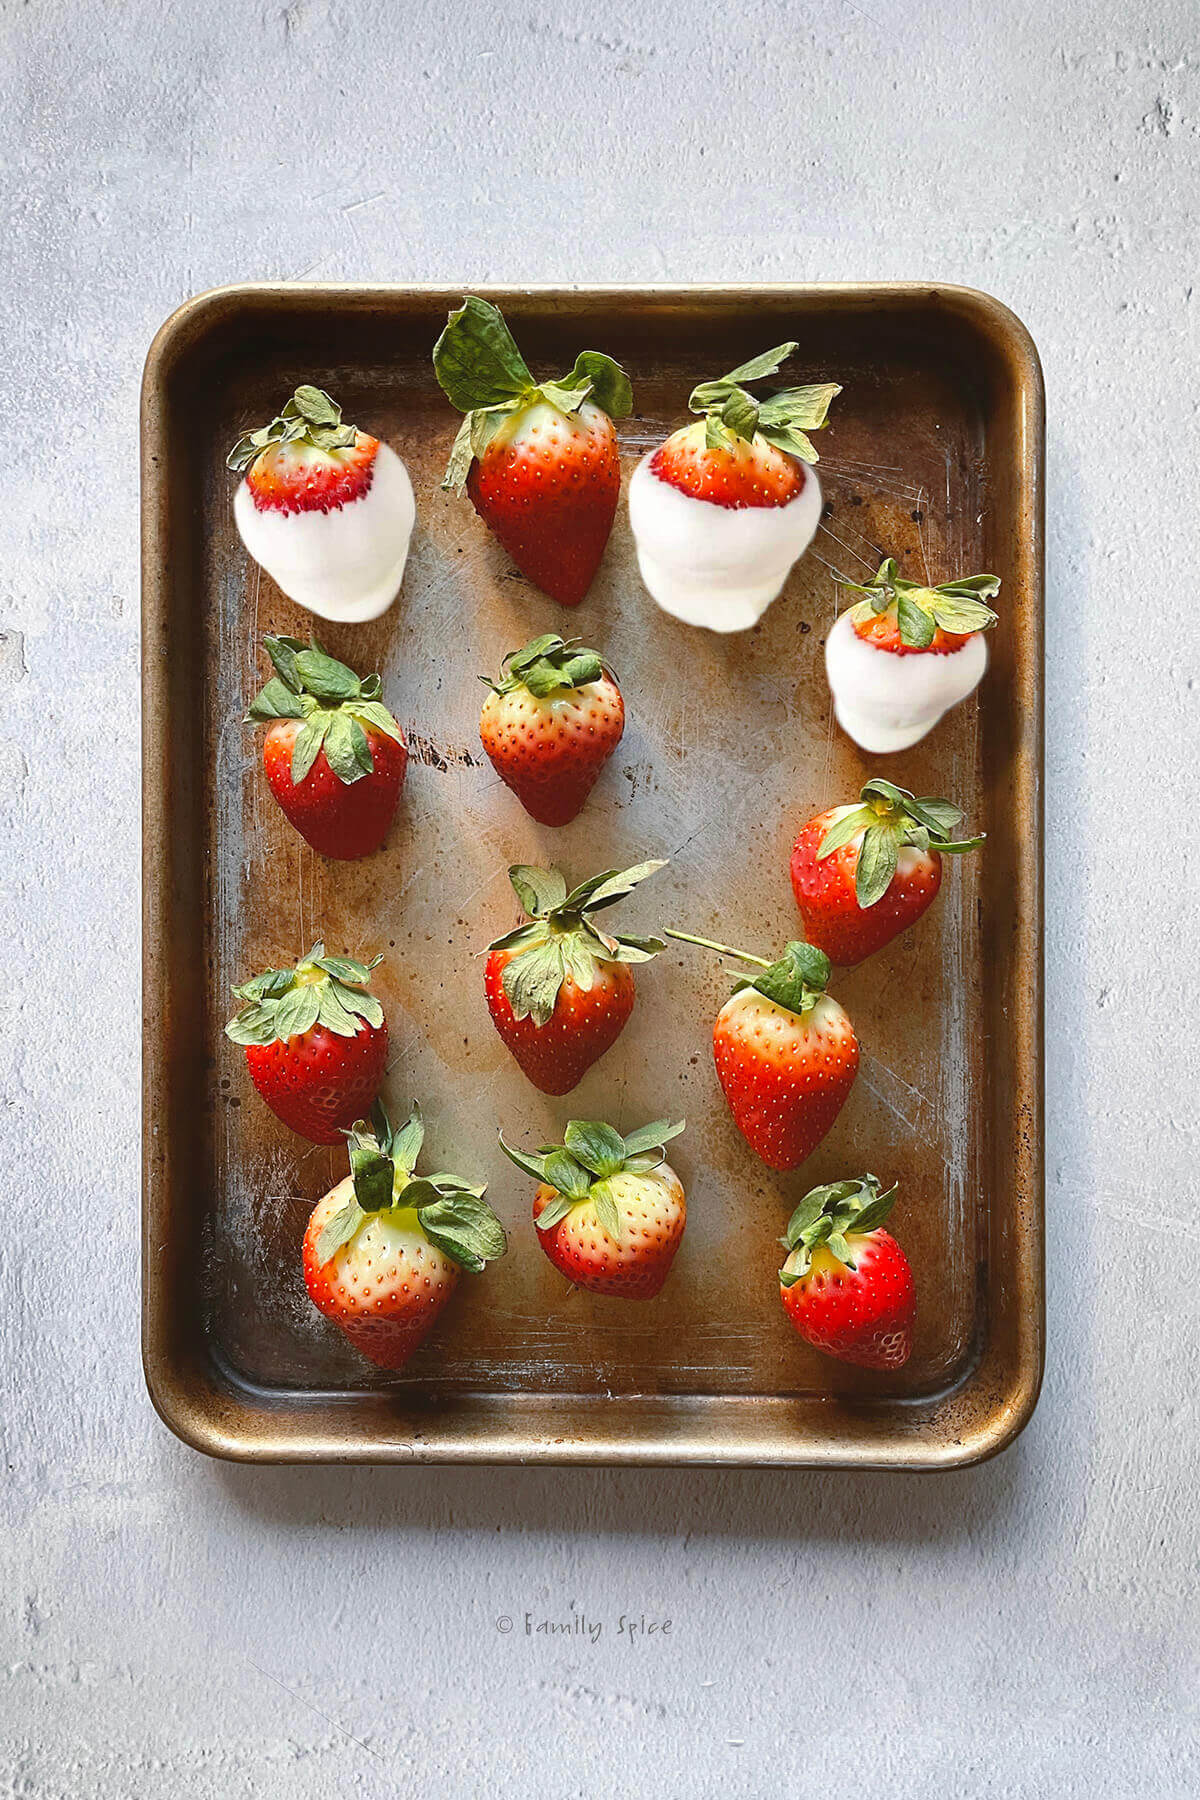 Large strawberries on small baking sheet with some of them dipped in white chocolate